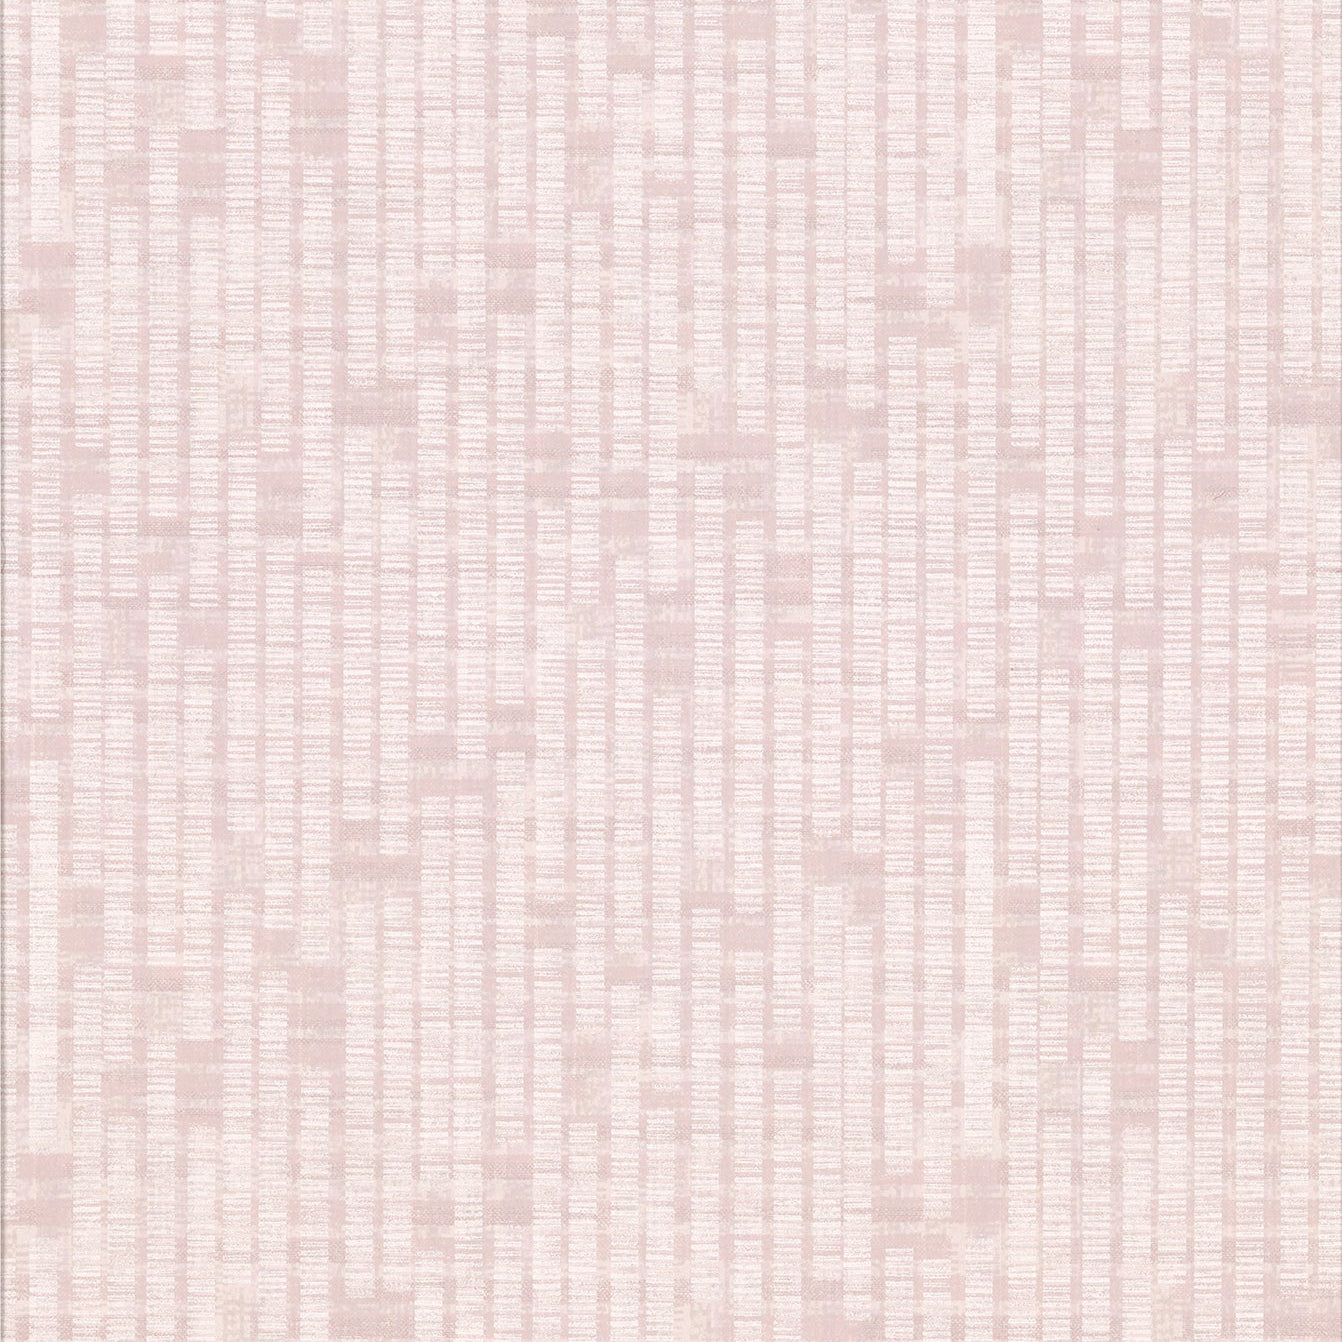 Looking 2909-IH-23609 Riva Clarice Pink Distressed Faux Linen Brewster Wallpaper